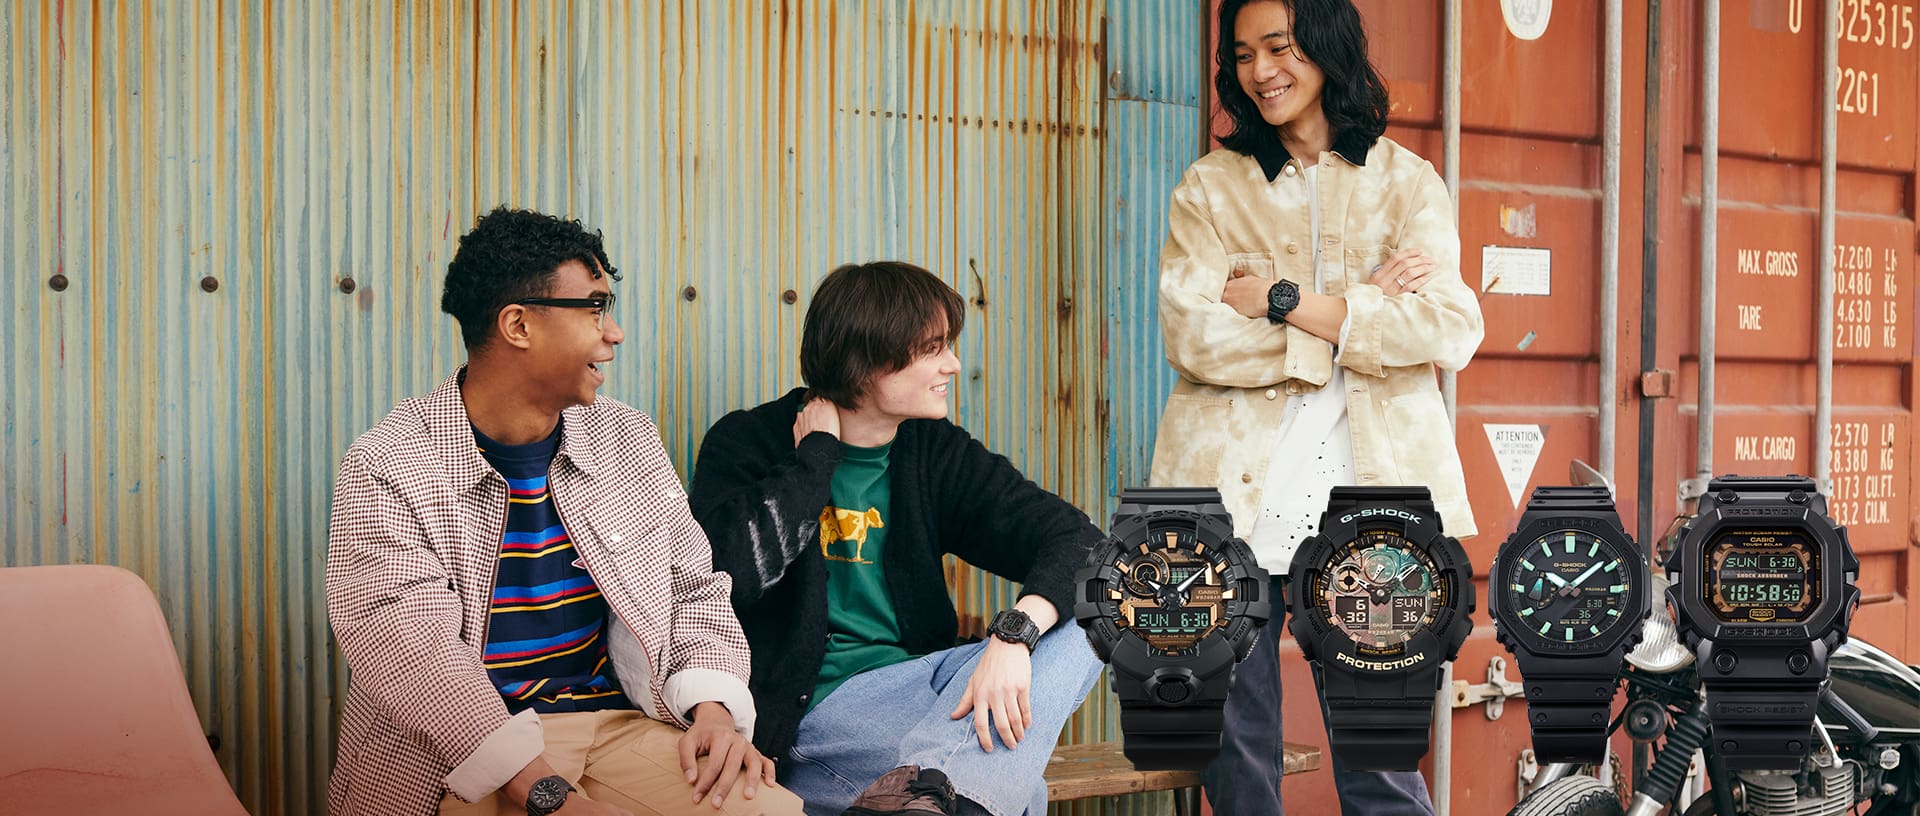 Group of friends sitting by a some rusted shipping containers wearing black and rust colored G-SHOCK watches